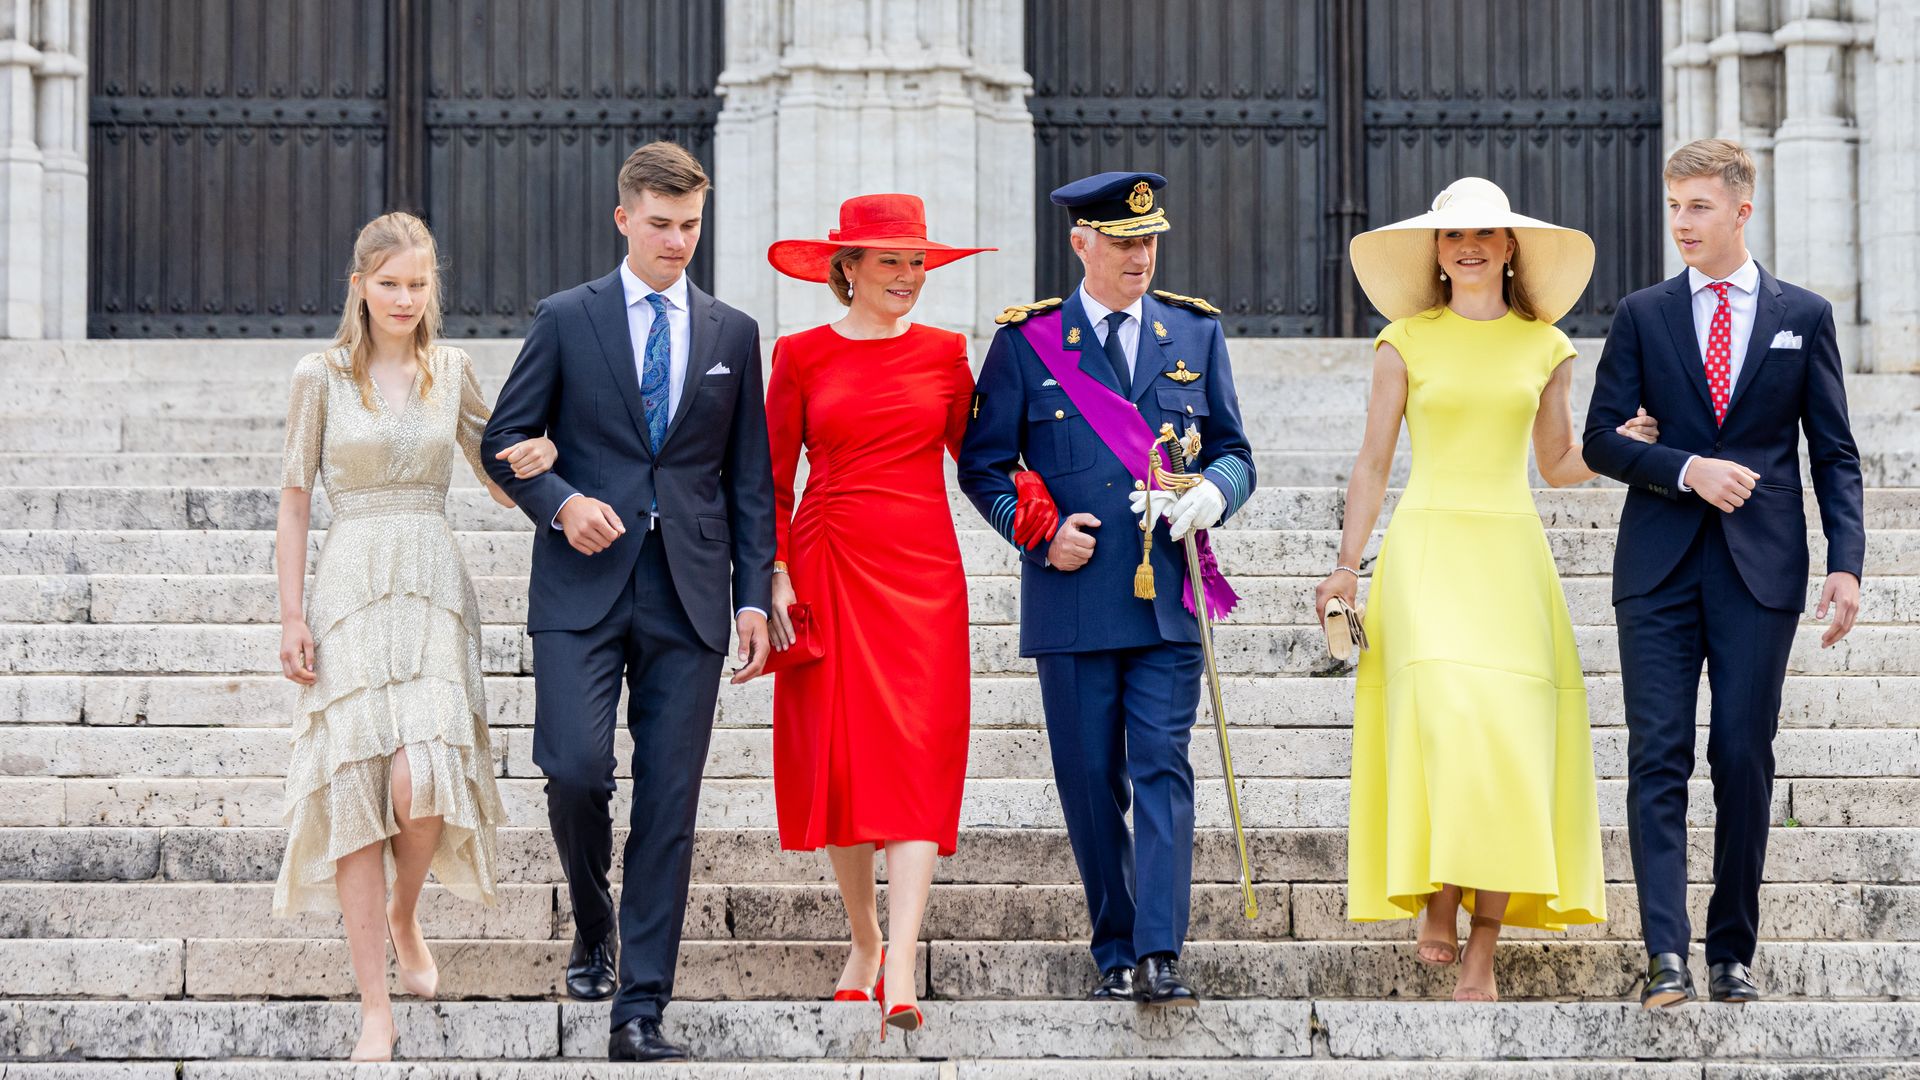 Belgium Royal Family Attends National Day Ceremony